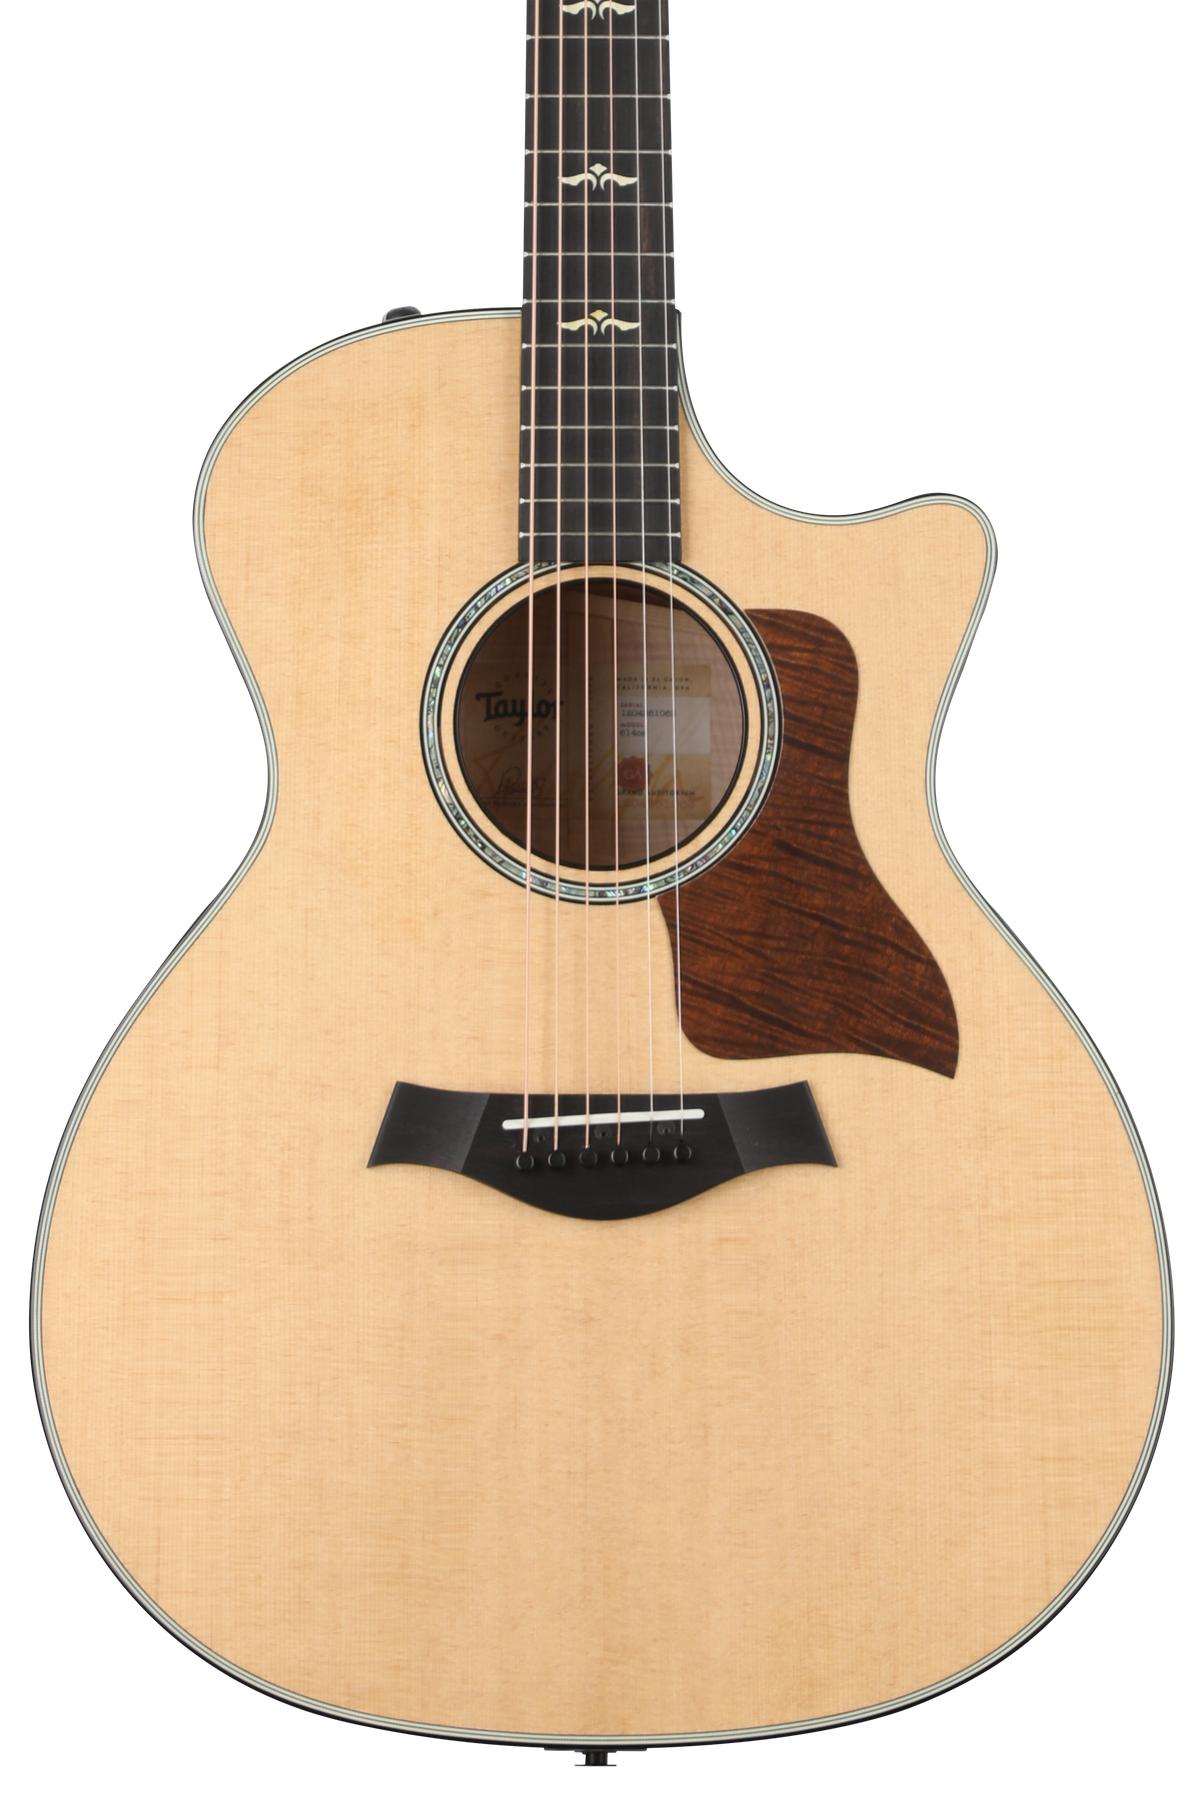 Taylor 614ce Acoustic-electric Guitar - Natural Top, Brown Sugar Stain Back and Sides